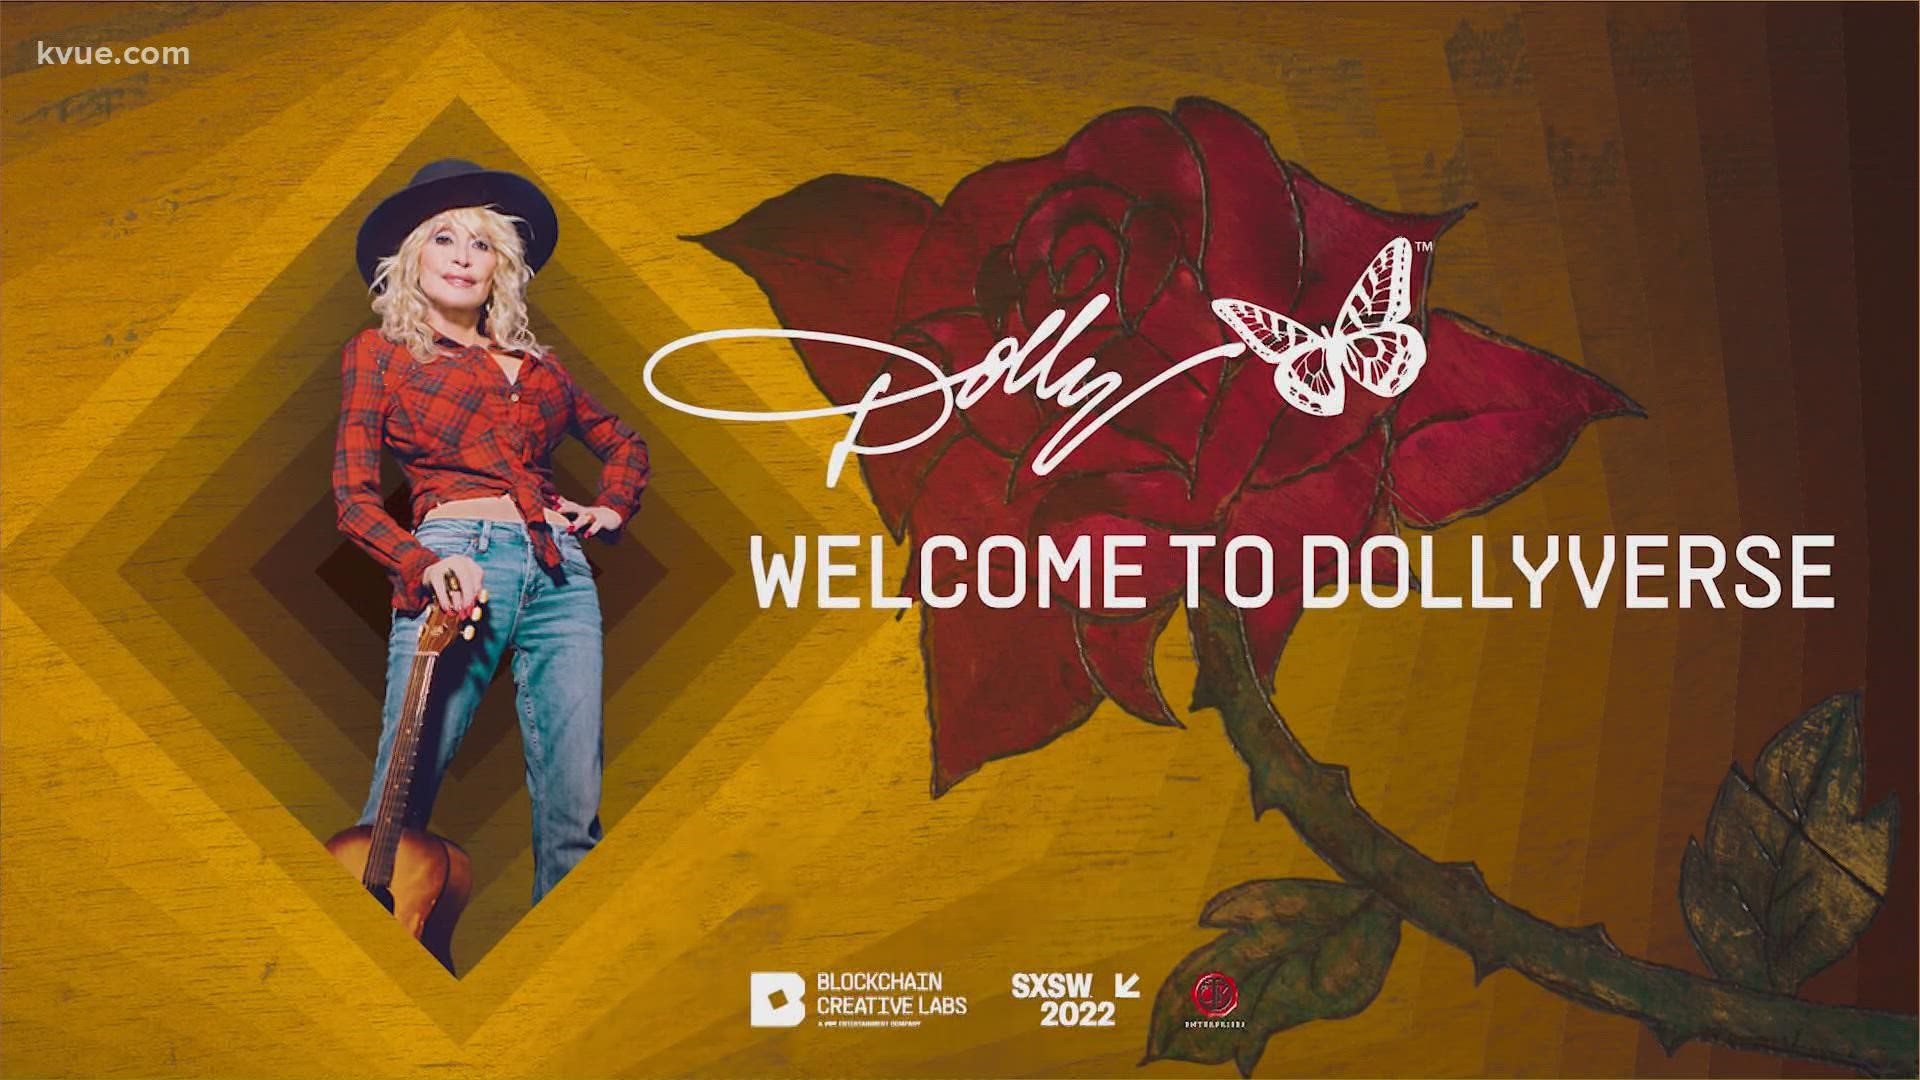 Dolly Parton will make her SXSW debut. The country music icon will speak, perform and celebrate the launch of her new "Dollyverse" online experience.